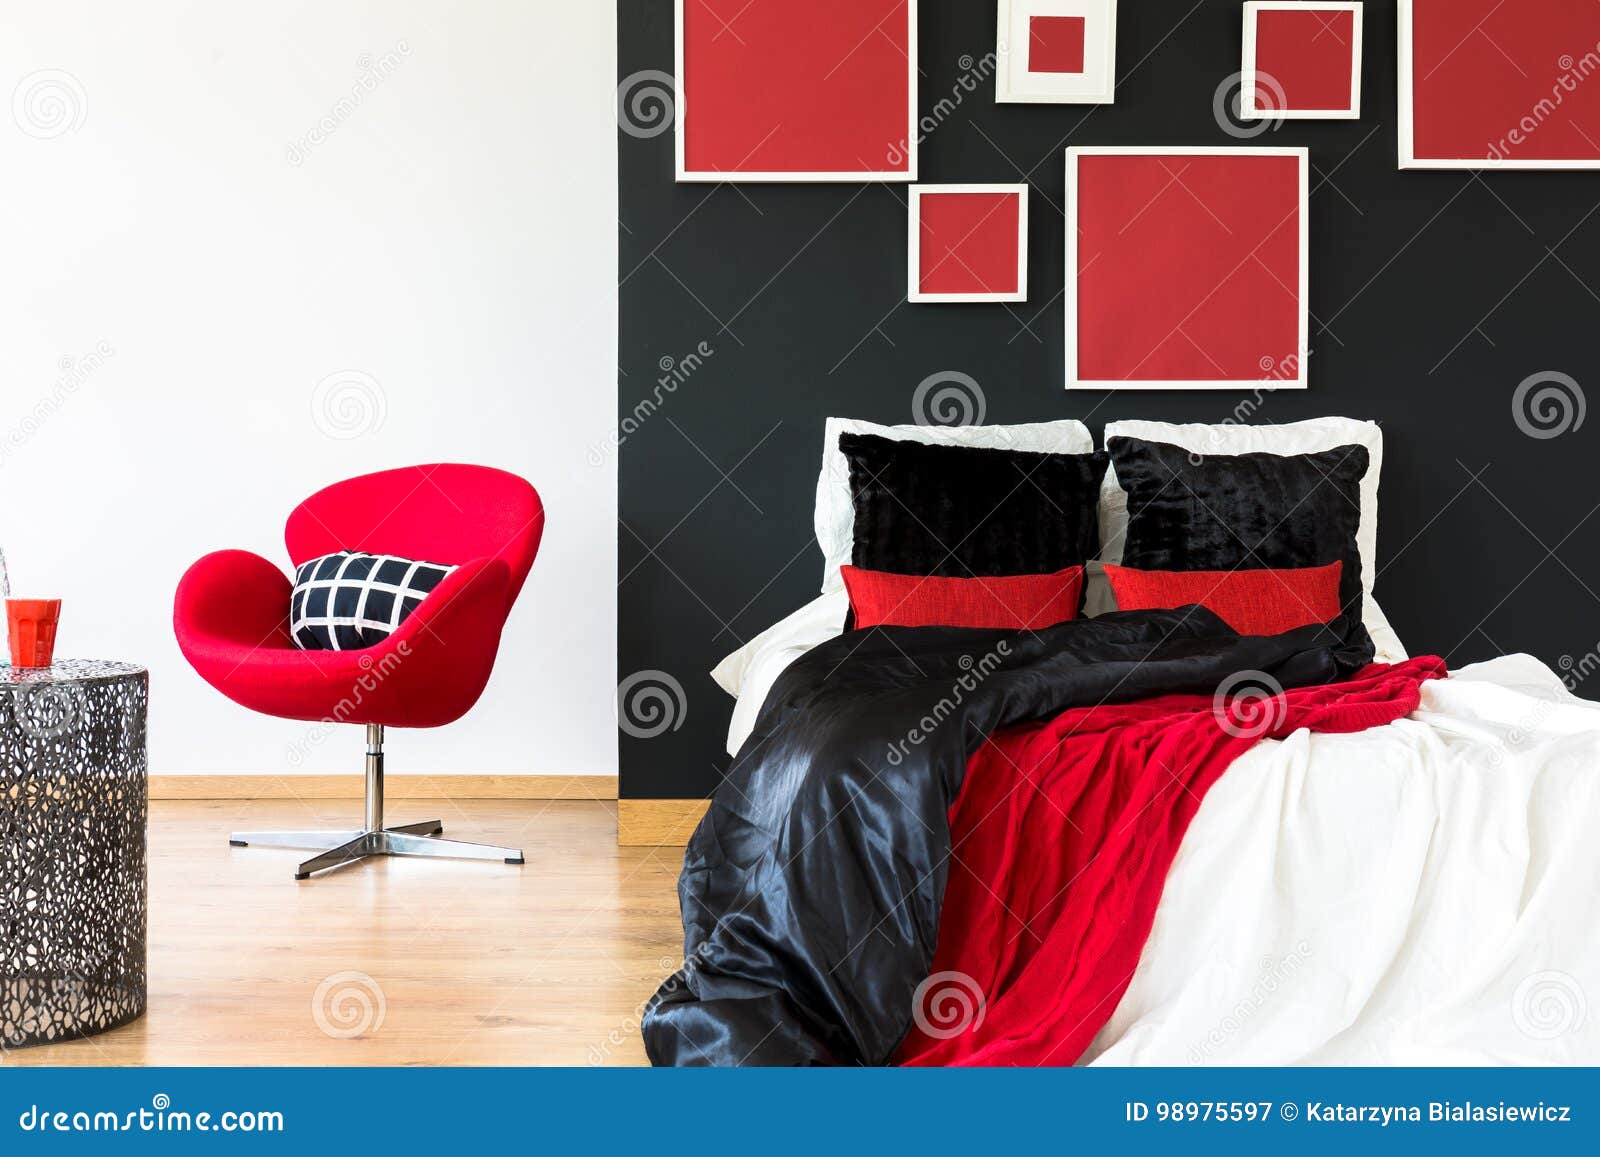 Elegant Bedroom With Red Coverlet Stock Image Image Of